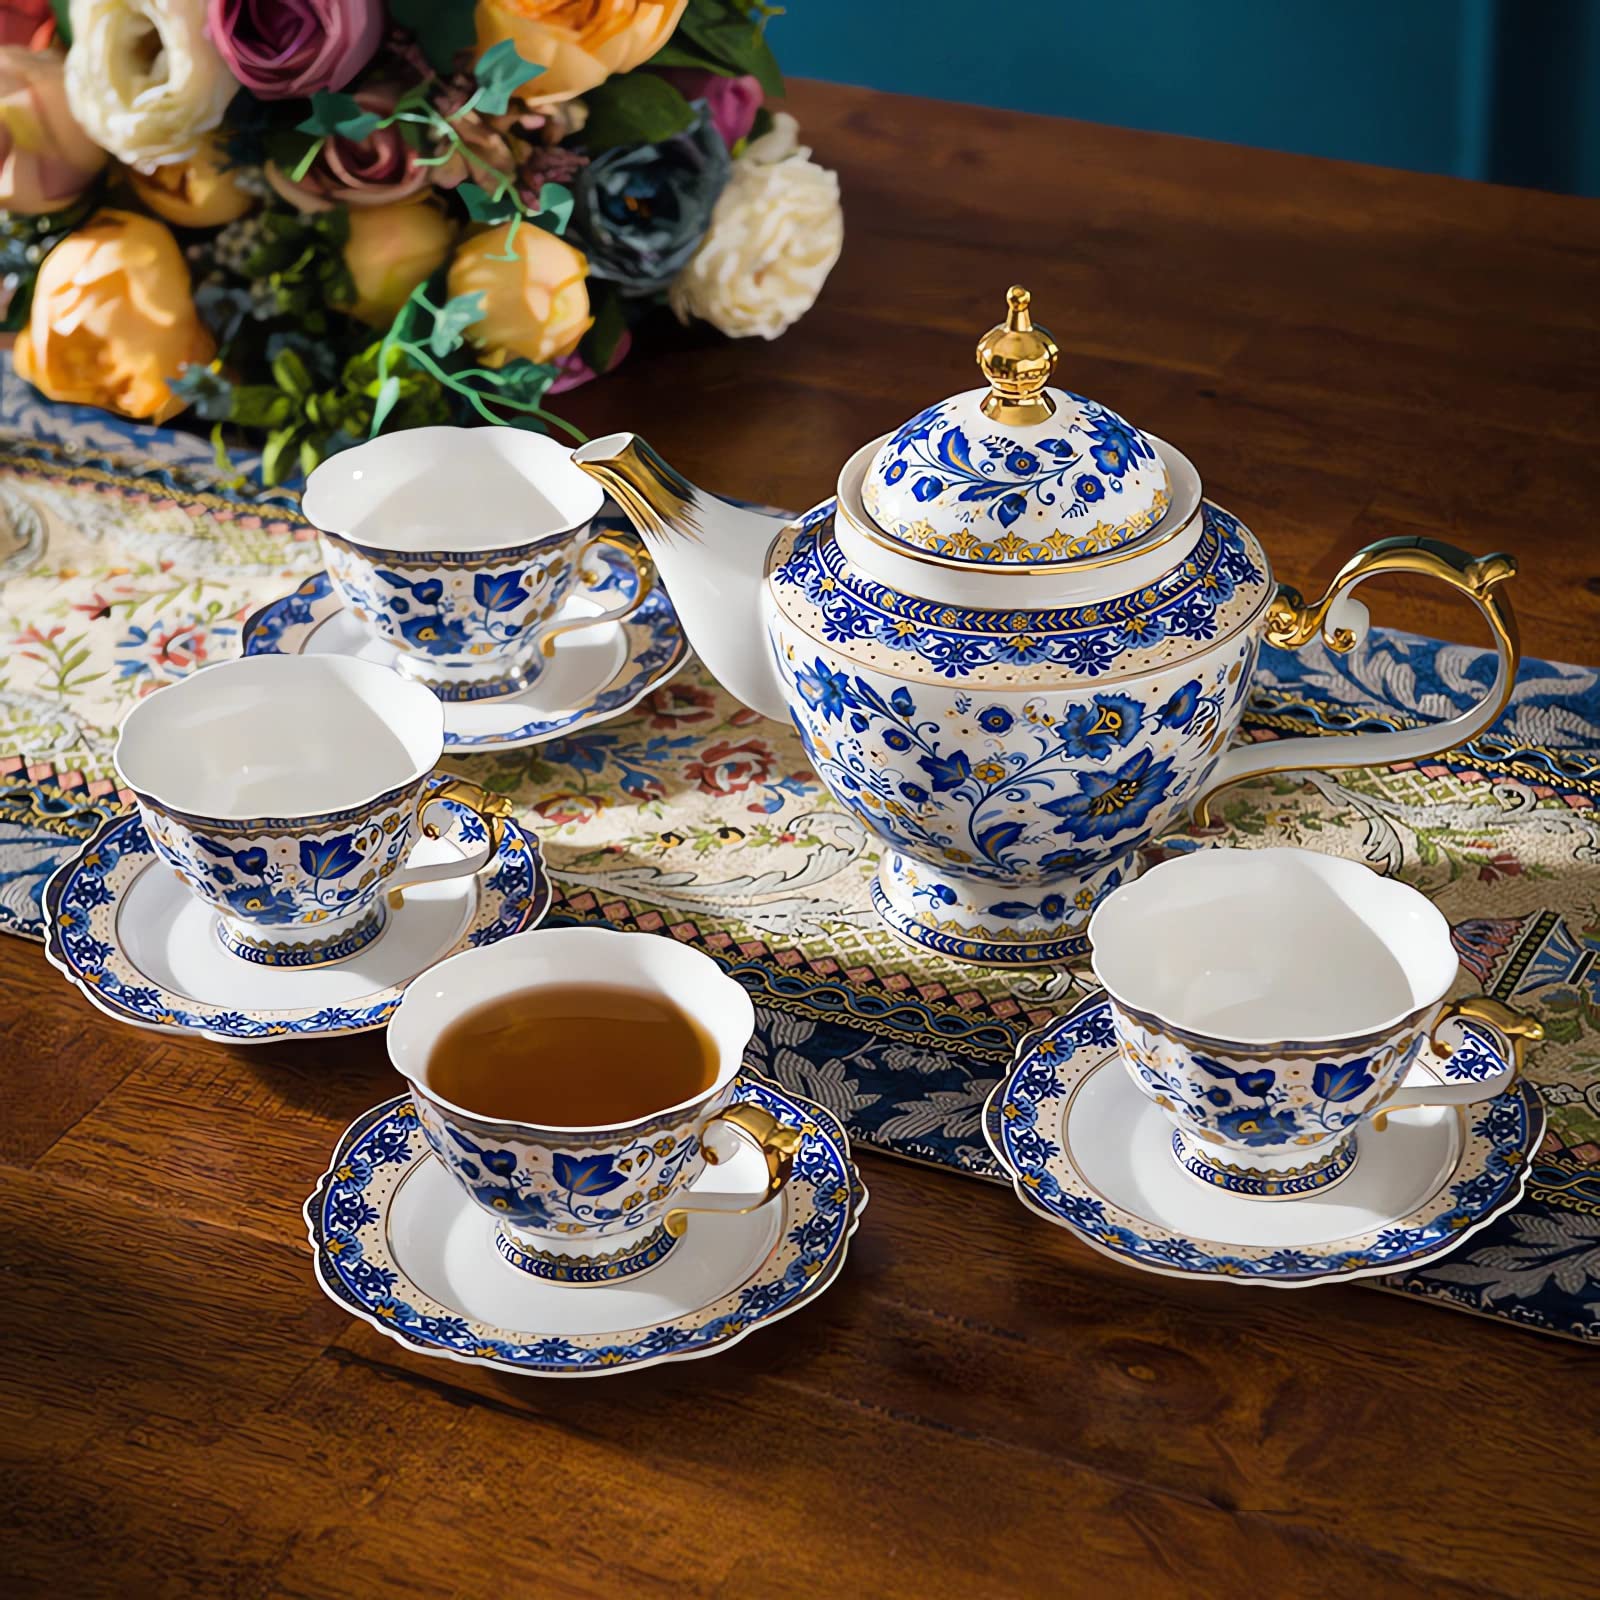 ACMLIFE Bone China Tea Set, 13-Piece Blue and White Tea Sets for Adults, Vintage Tea Sets for Women Tea Party or Gift Giving